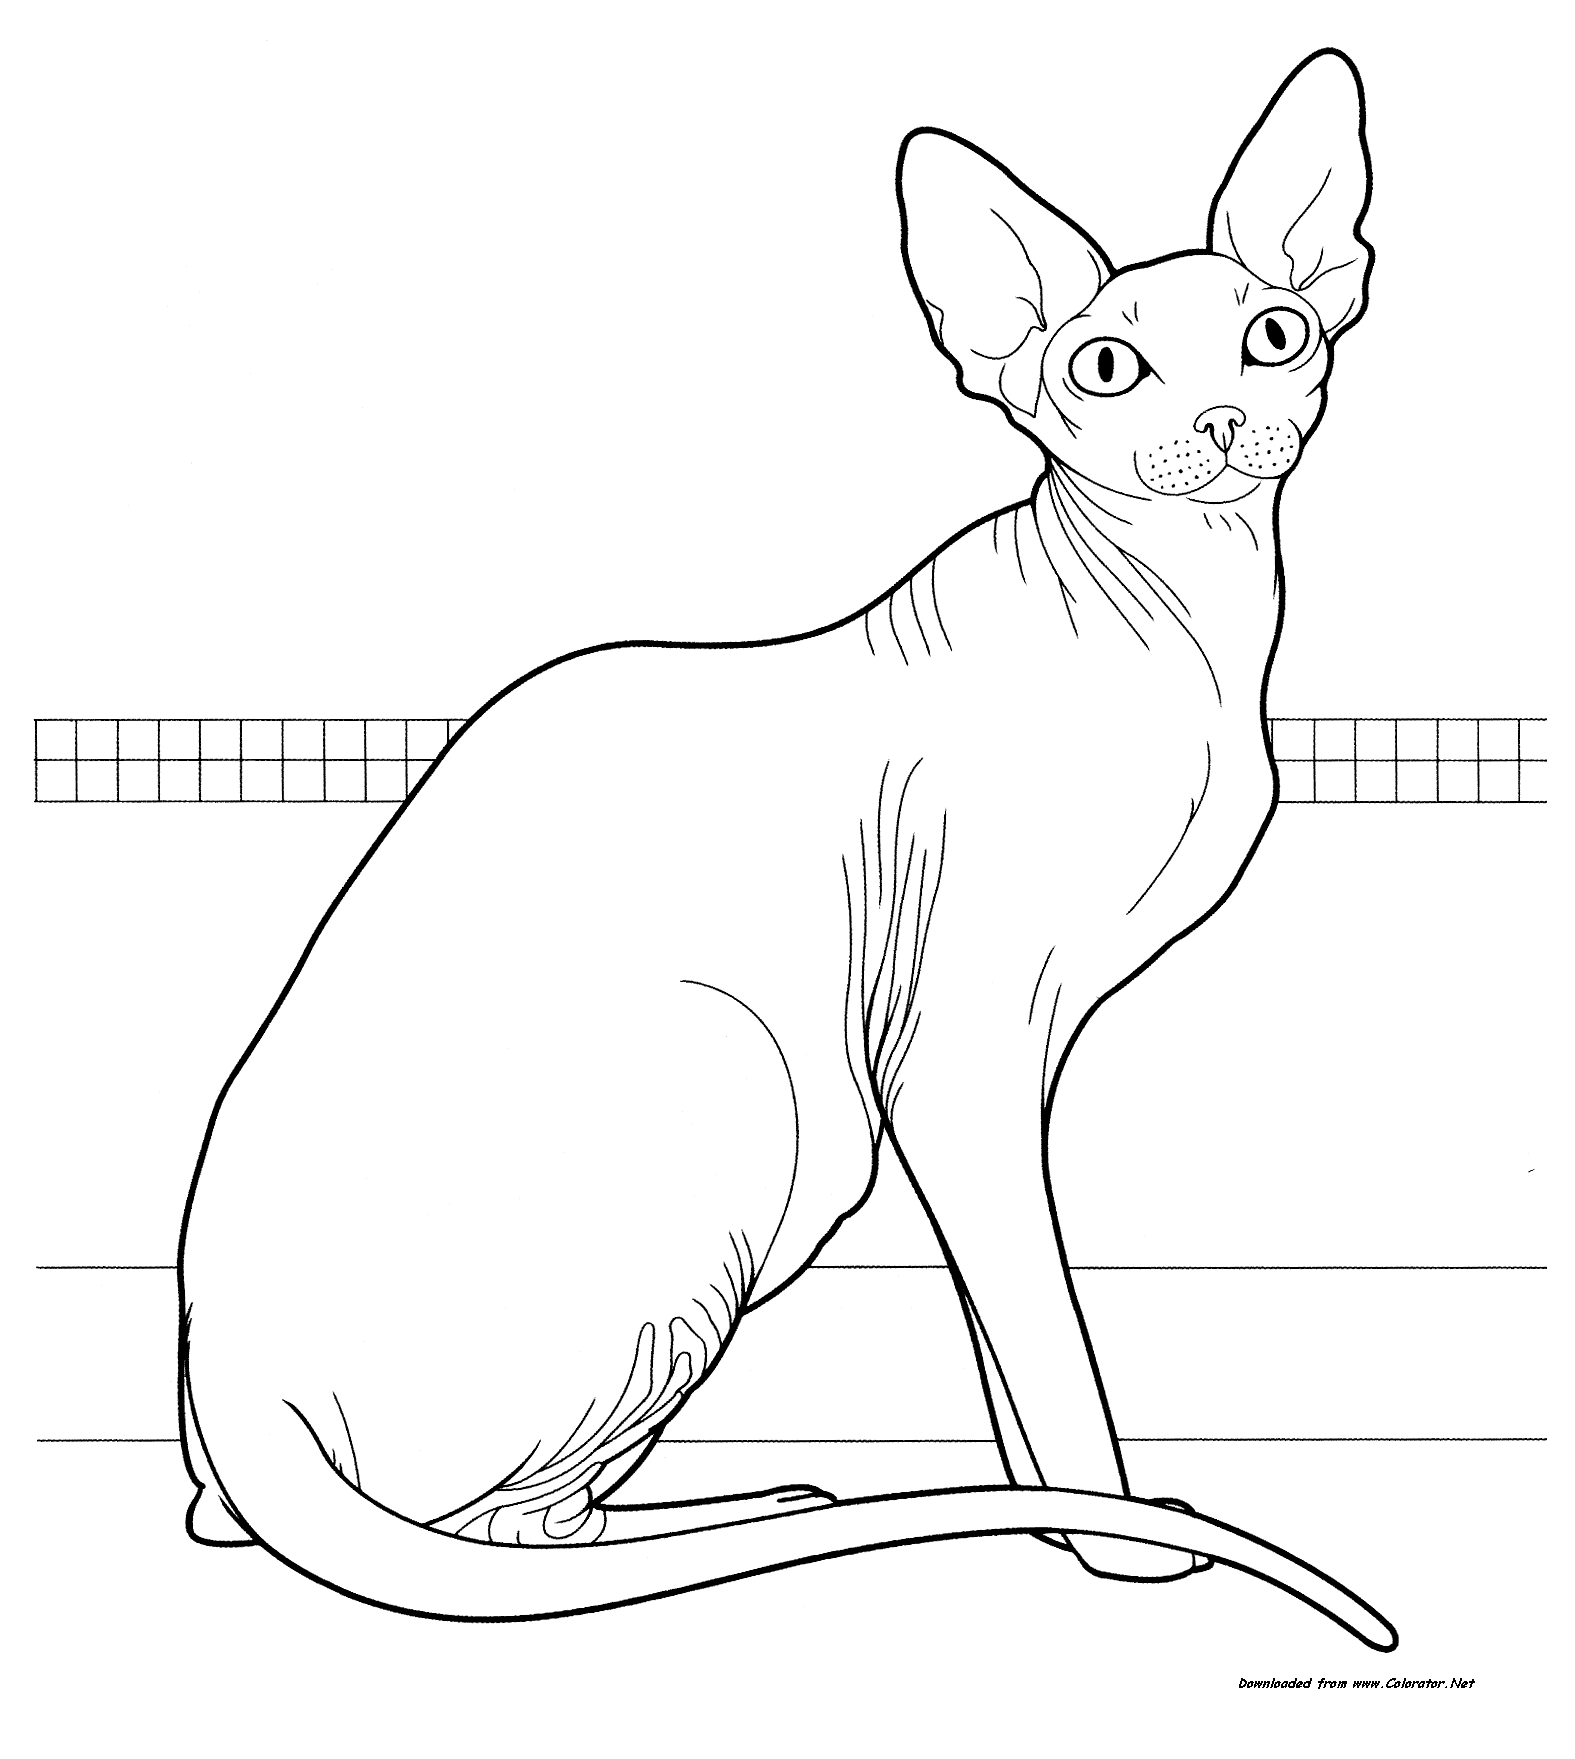 Sphynx Cat coloring #16, Download drawings